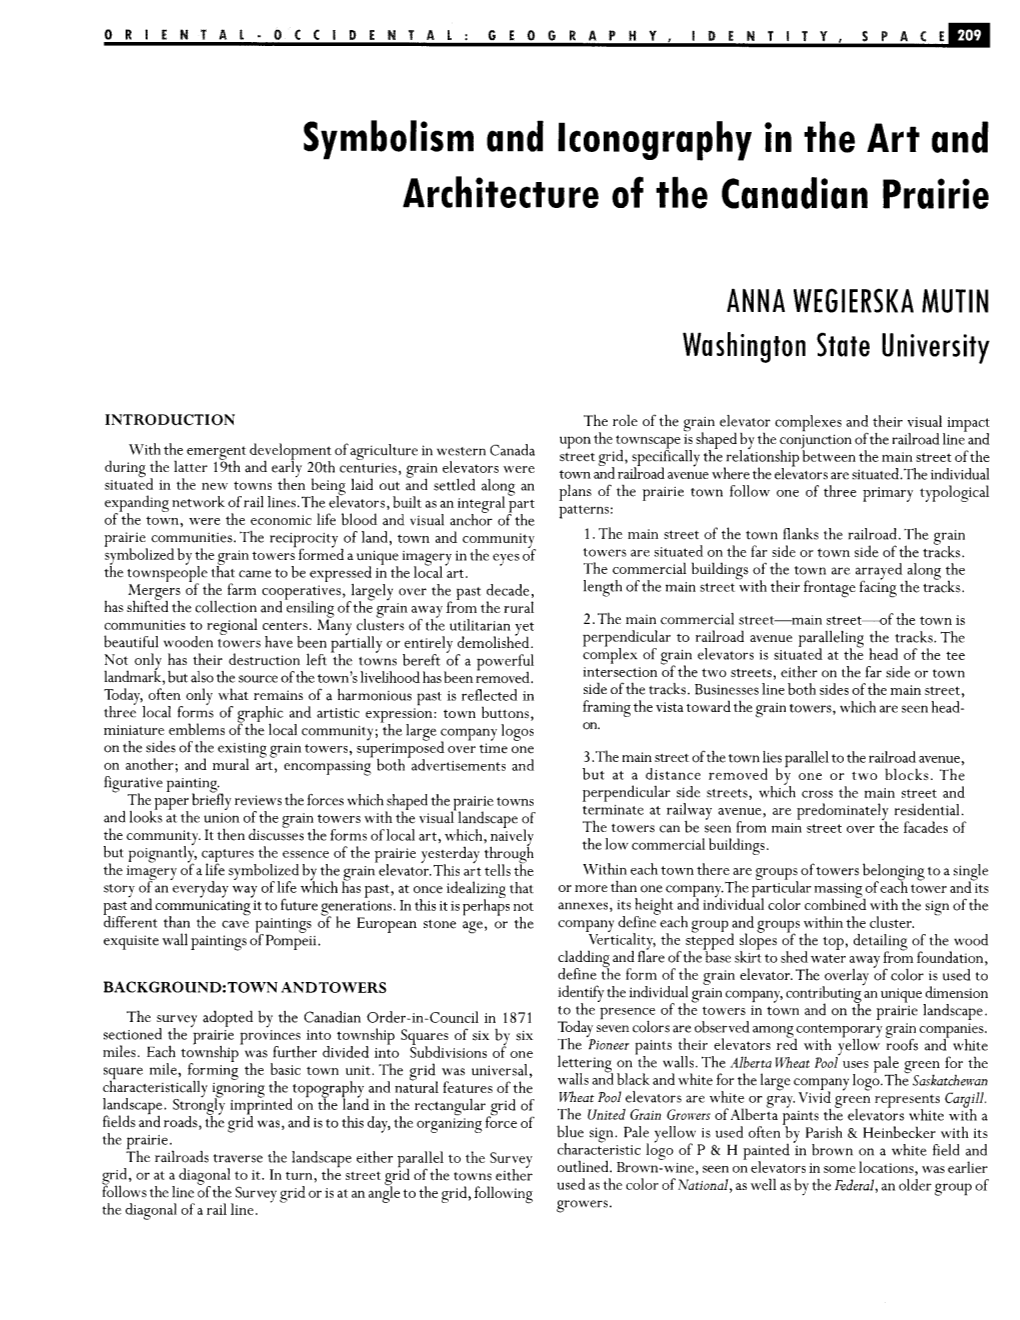 Symbolism and Iconography in the Art and Architecture of the Canadian Prairie